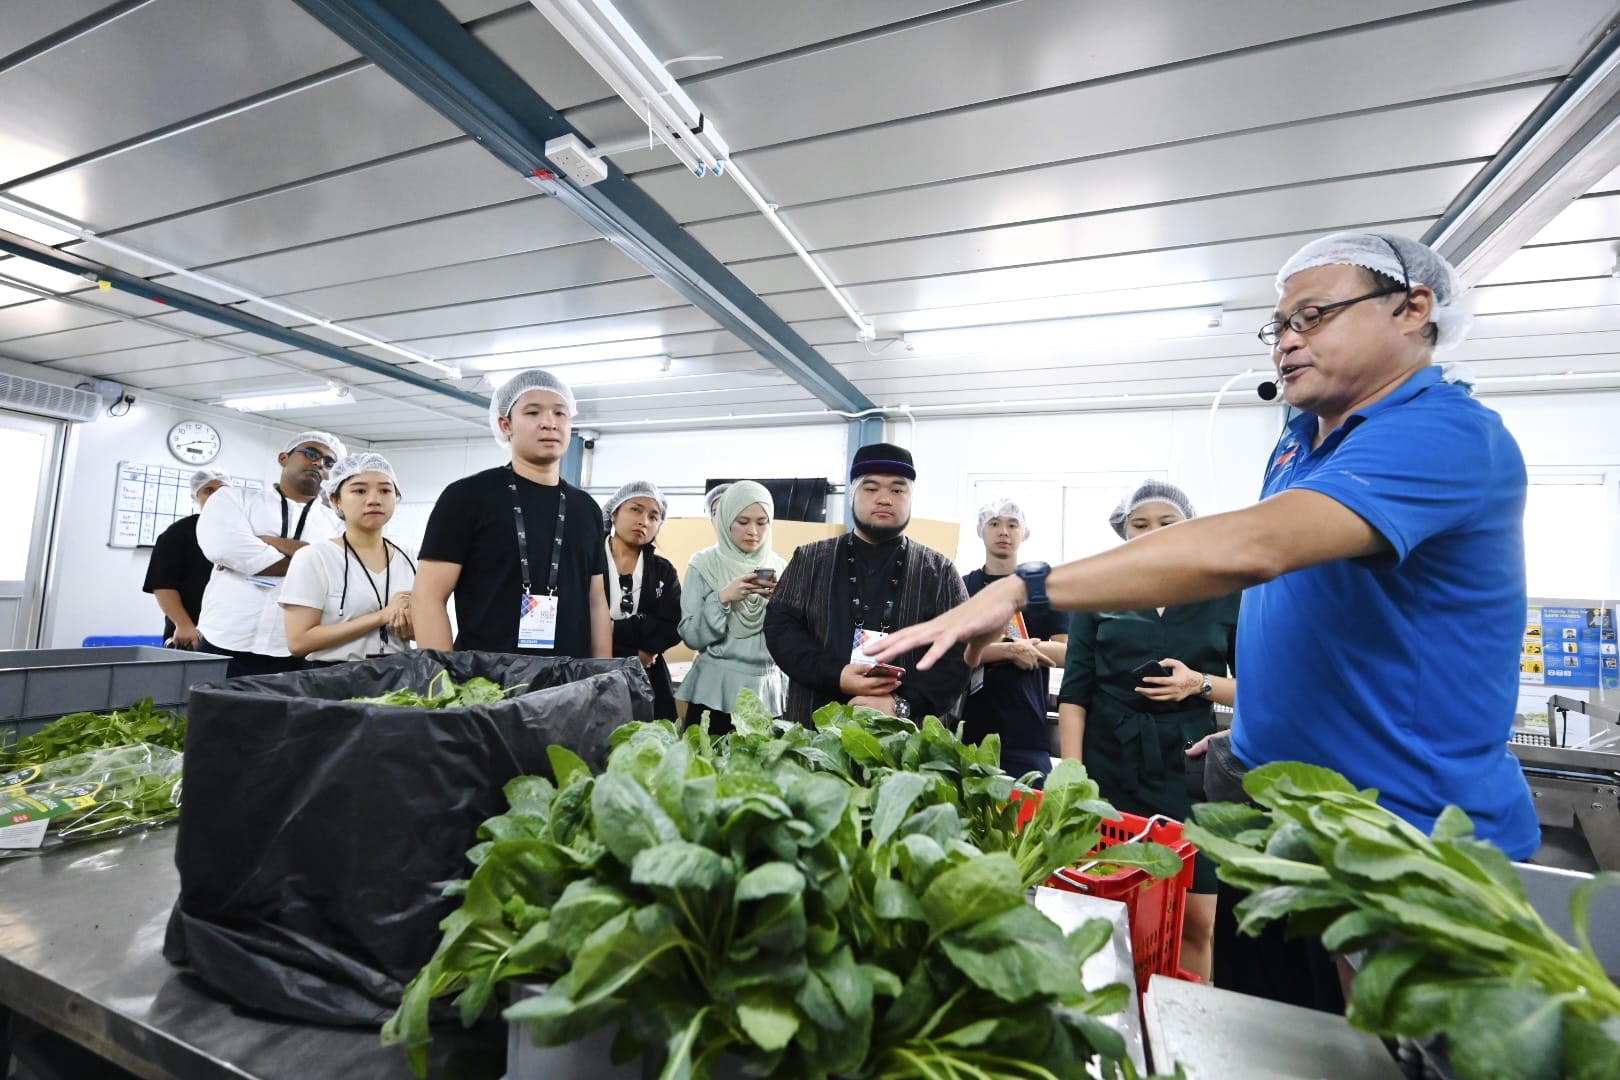 Fellows visiting a packing room at Comcrop, Singapore's first commercial rooftop farming company